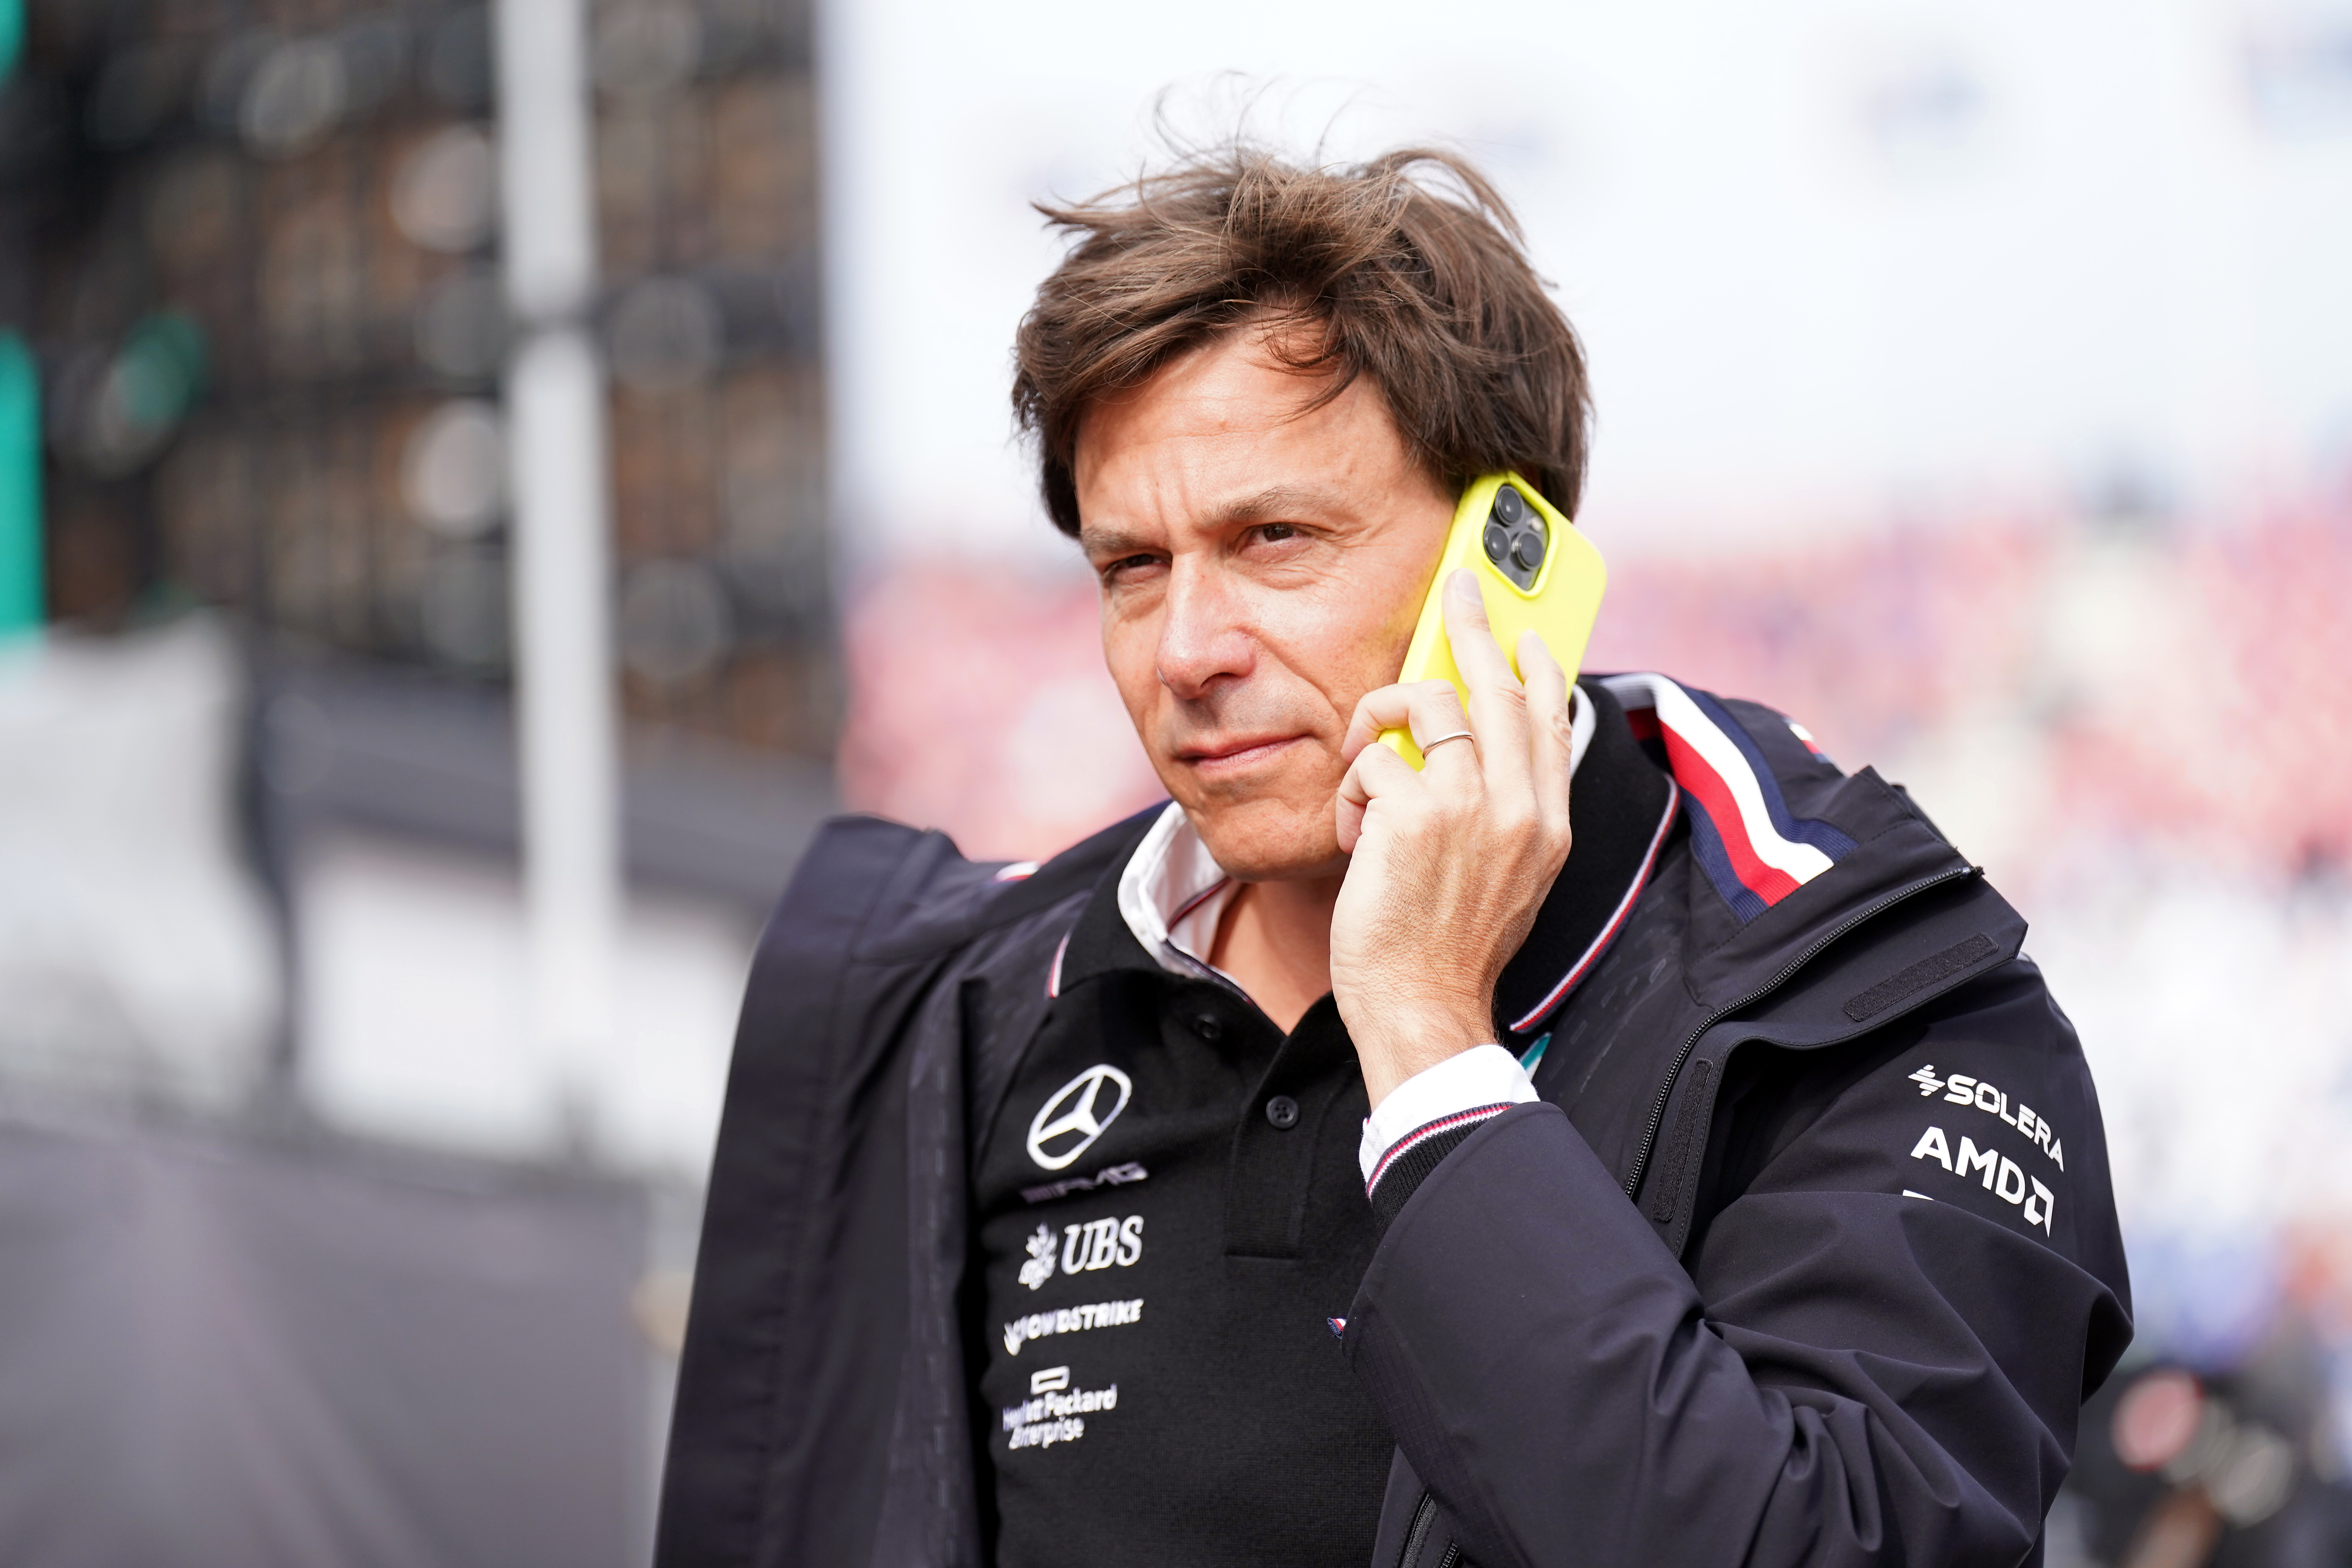 Mercedes team principal Toto Wolff admitted the news had come as a surprise